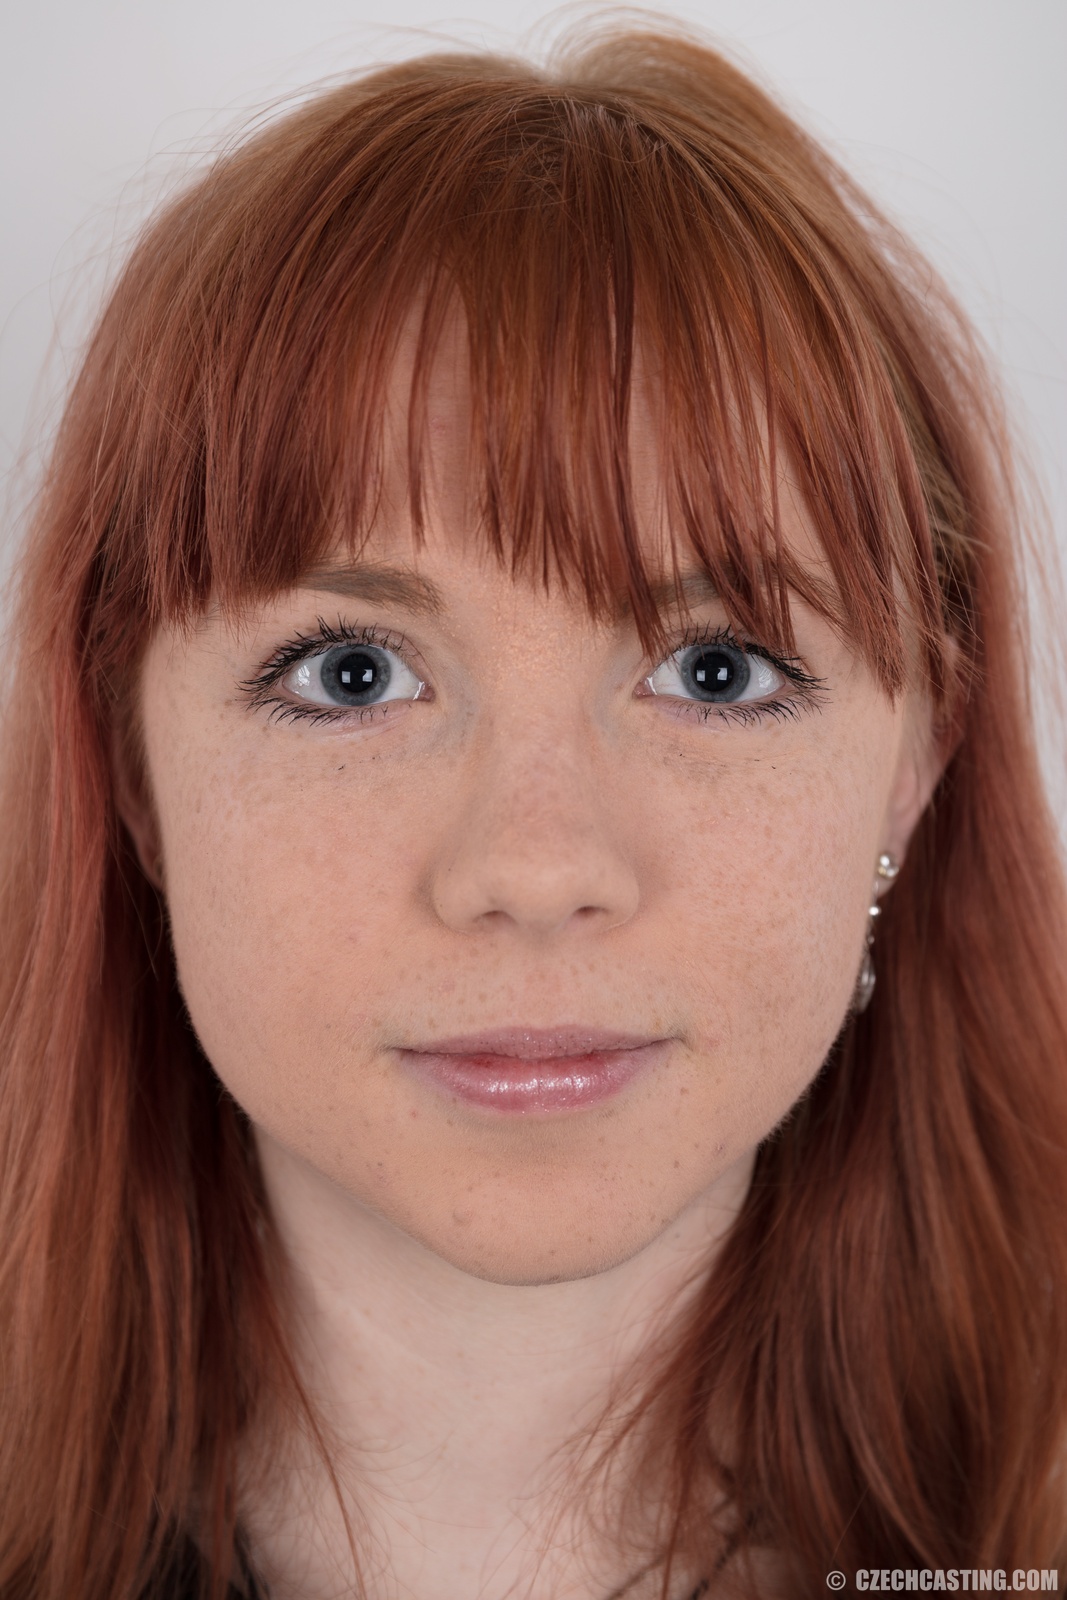 Czech Cute Redhead - Niky Stunningly cute young redhead with freckles Niky in the ...